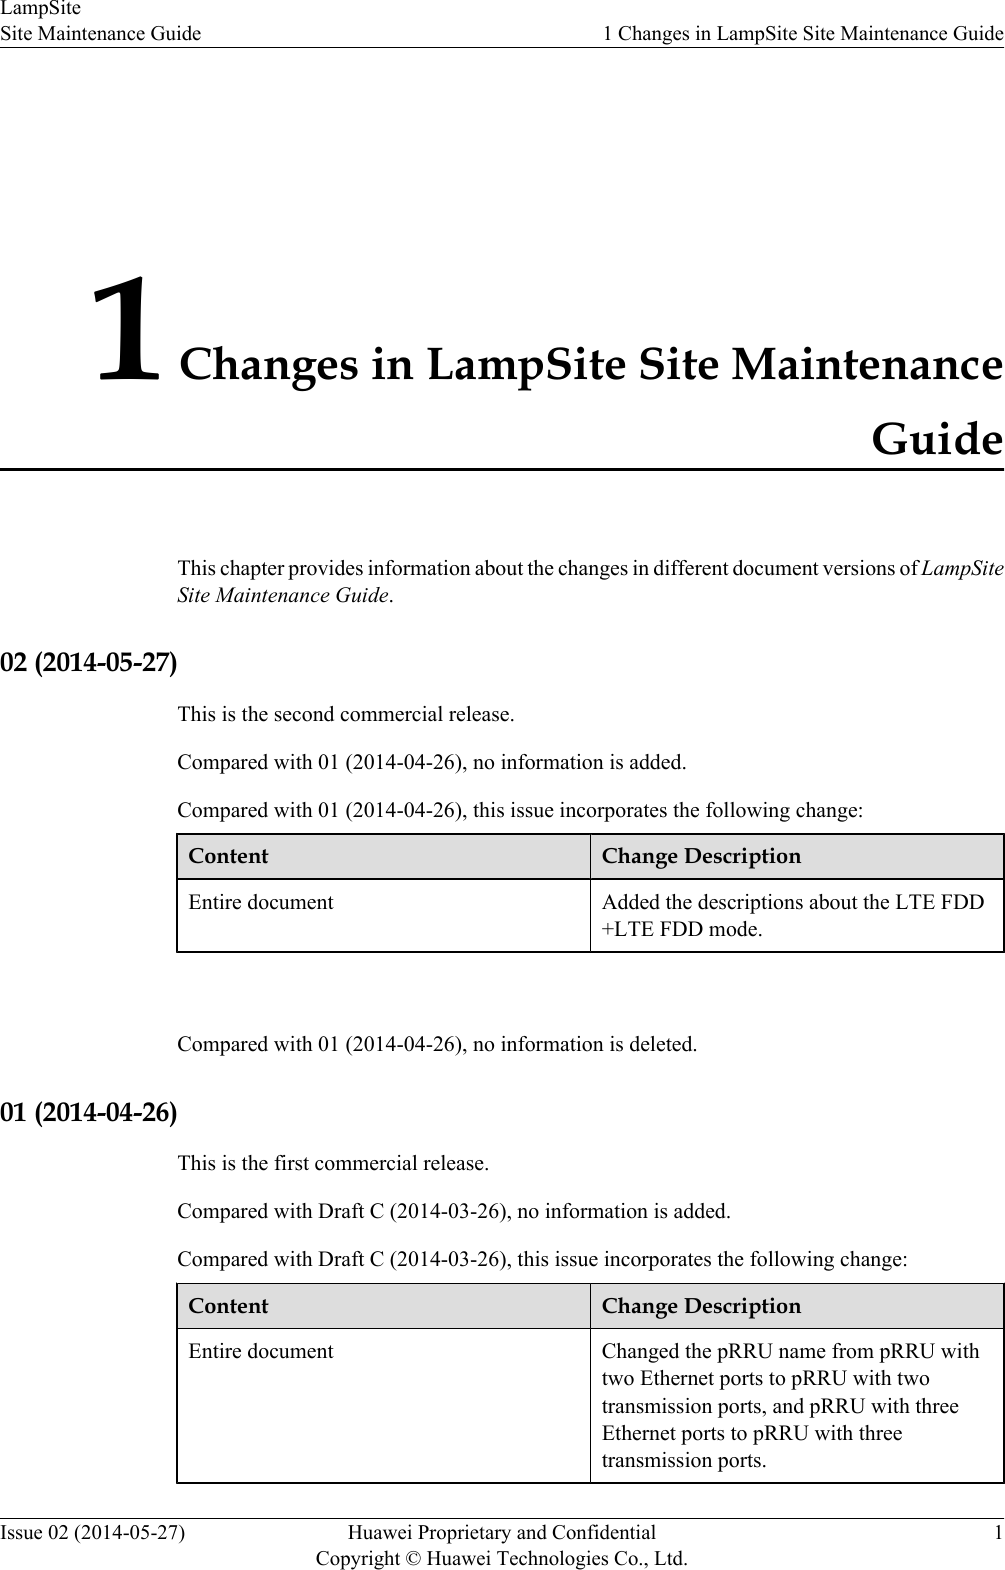 1 Changes in LampSite Site MaintenanceGuideThis chapter provides information about the changes in different document versions of LampSiteSite Maintenance Guide.02 (2014-05-27)This is the second commercial release.Compared with 01 (2014-04-26), no information is added.Compared with 01 (2014-04-26), this issue incorporates the following change:Content Change DescriptionEntire document Added the descriptions about the LTE FDD+LTE FDD mode. Compared with 01 (2014-04-26), no information is deleted.01 (2014-04-26)This is the first commercial release.Compared with Draft C (2014-03-26), no information is added.Compared with Draft C (2014-03-26), this issue incorporates the following change:Content Change DescriptionEntire document Changed the pRRU name from pRRU withtwo Ethernet ports to pRRU with twotransmission ports, and pRRU with threeEthernet ports to pRRU with threetransmission ports.LampSiteSite Maintenance Guide 1 Changes in LampSite Site Maintenance GuideIssue 02 (2014-05-27) Huawei Proprietary and ConfidentialCopyright © Huawei Technologies Co., Ltd.1